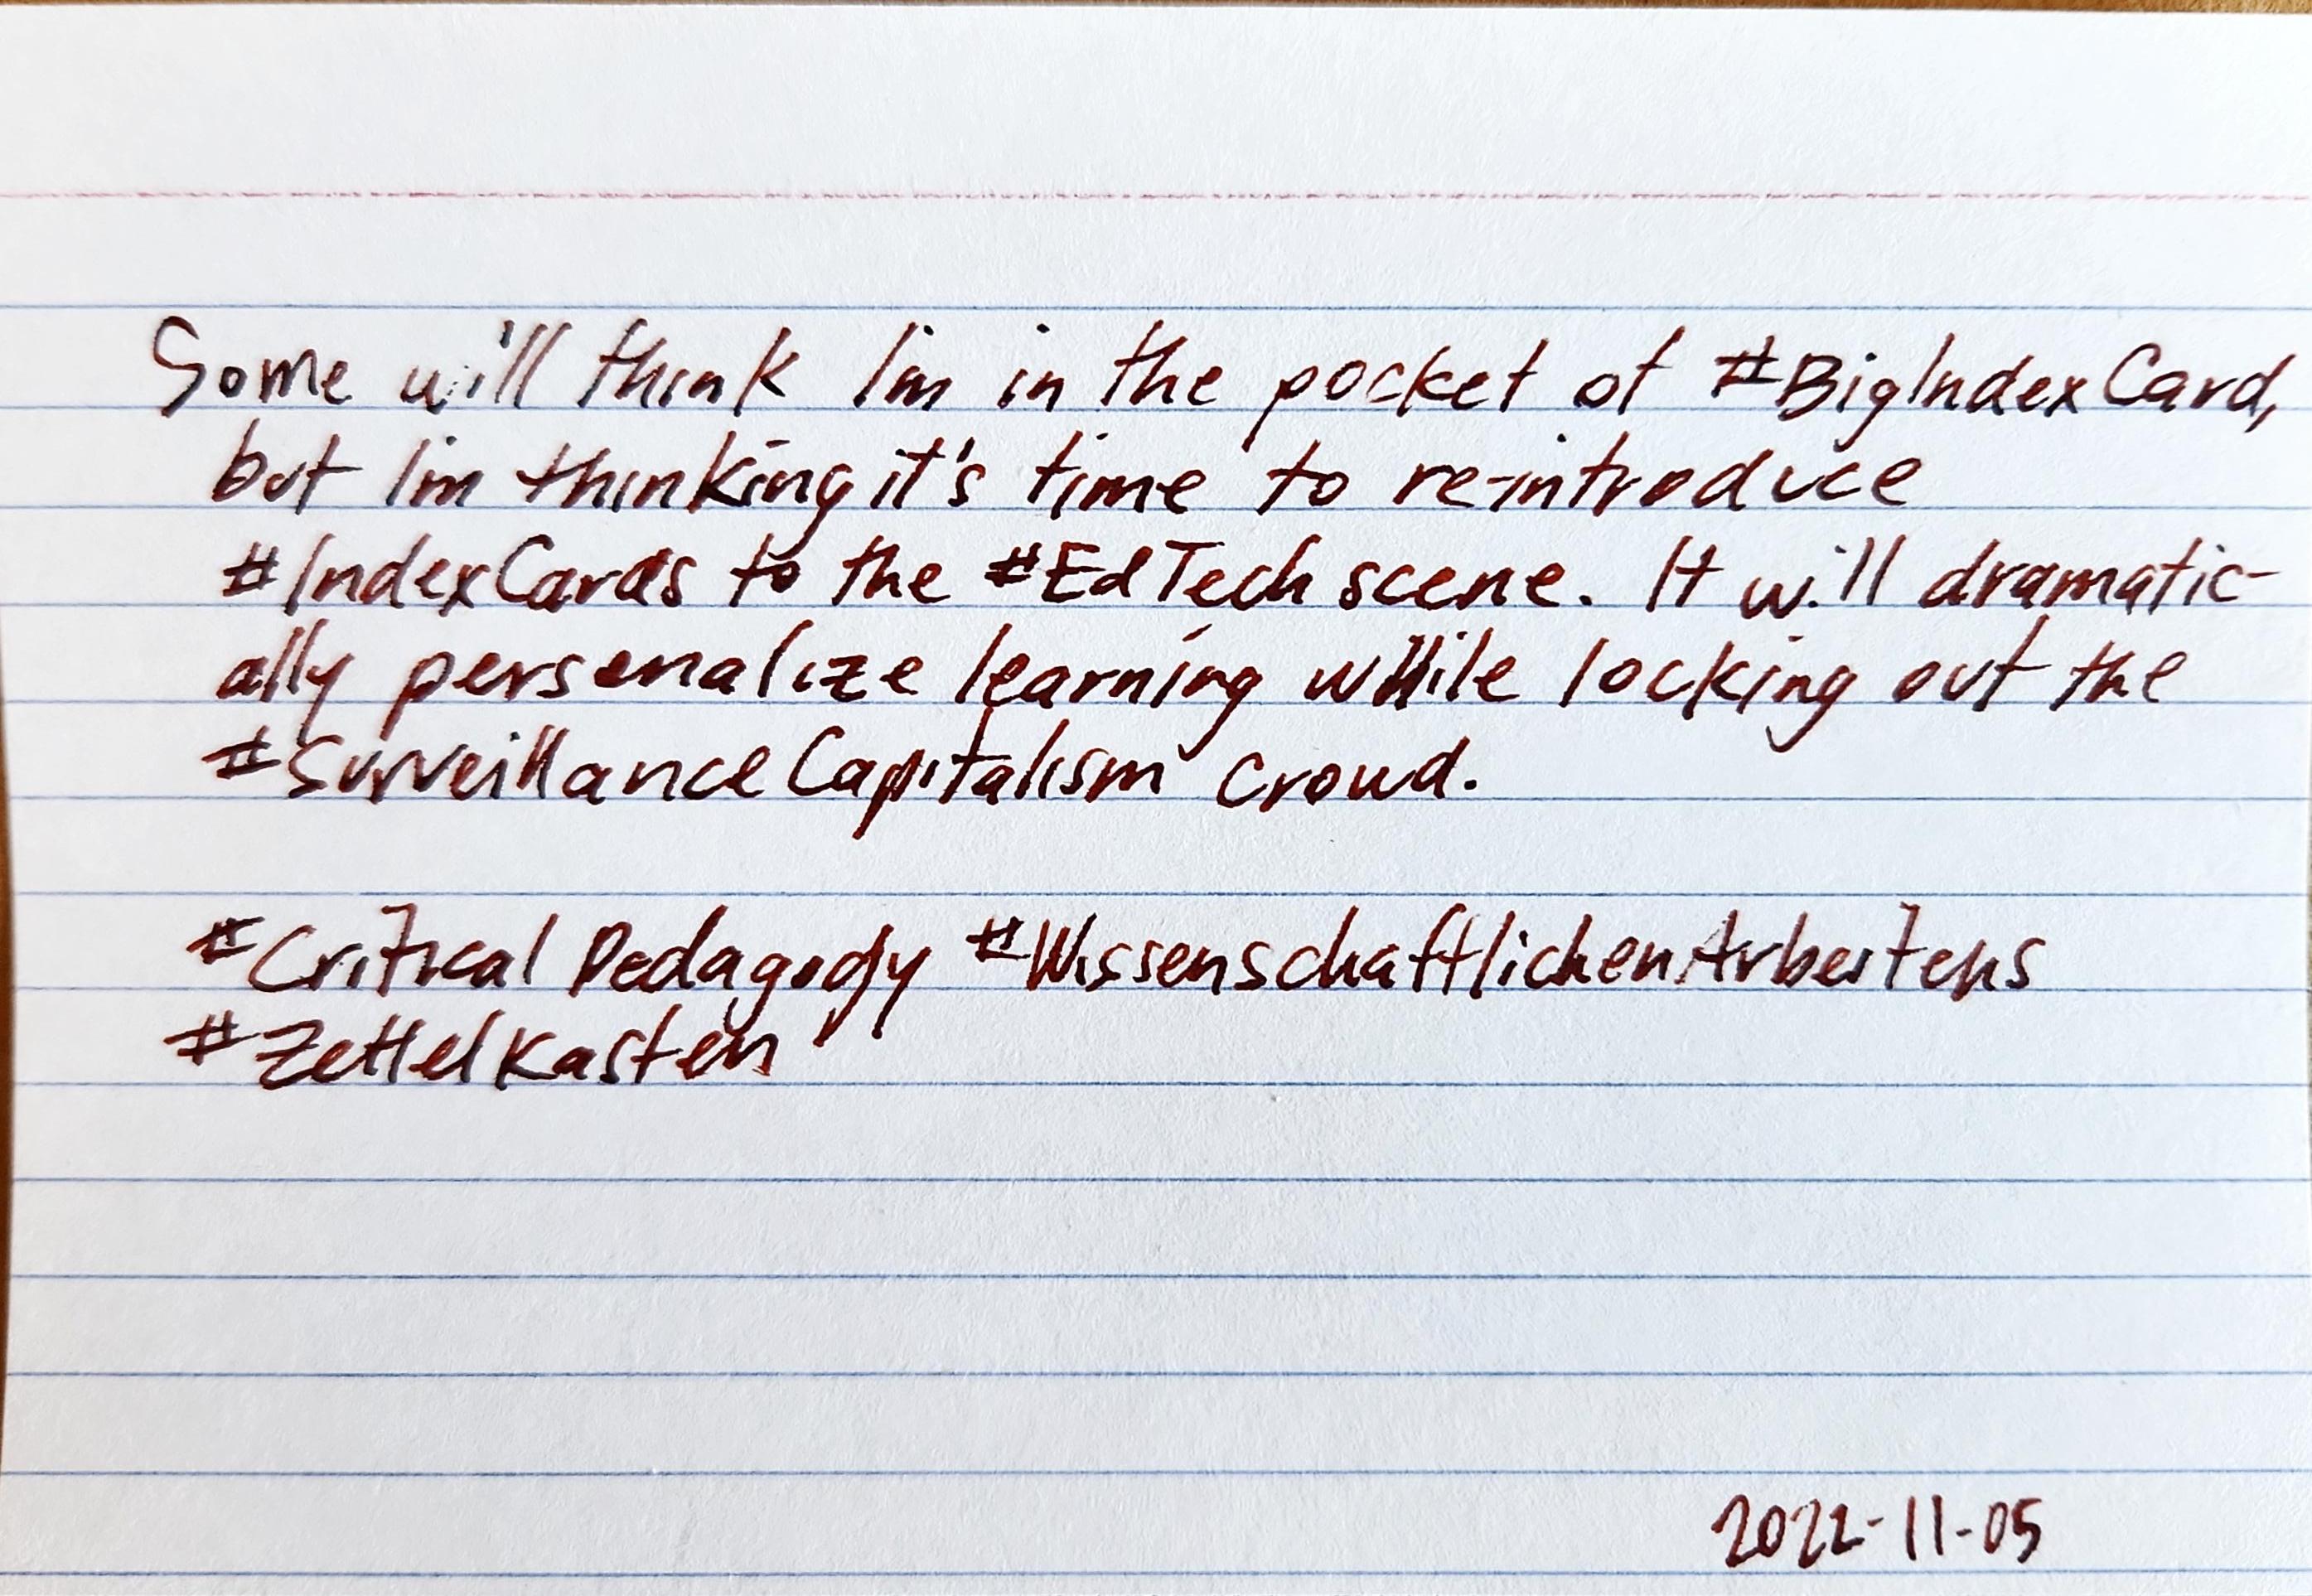 Handwritten index card that reads: Some will think I'm in the pocket of #BigIndexCard, but I'm thinking it's time to re-introduce #IndexCards to the #EdTech scene. It will dramatically personalize learning while locking out the #SurveillanceCapitalism crowd.  #CriticalPedagogy #WissenschaftlichenArbeitens #zettelkasten